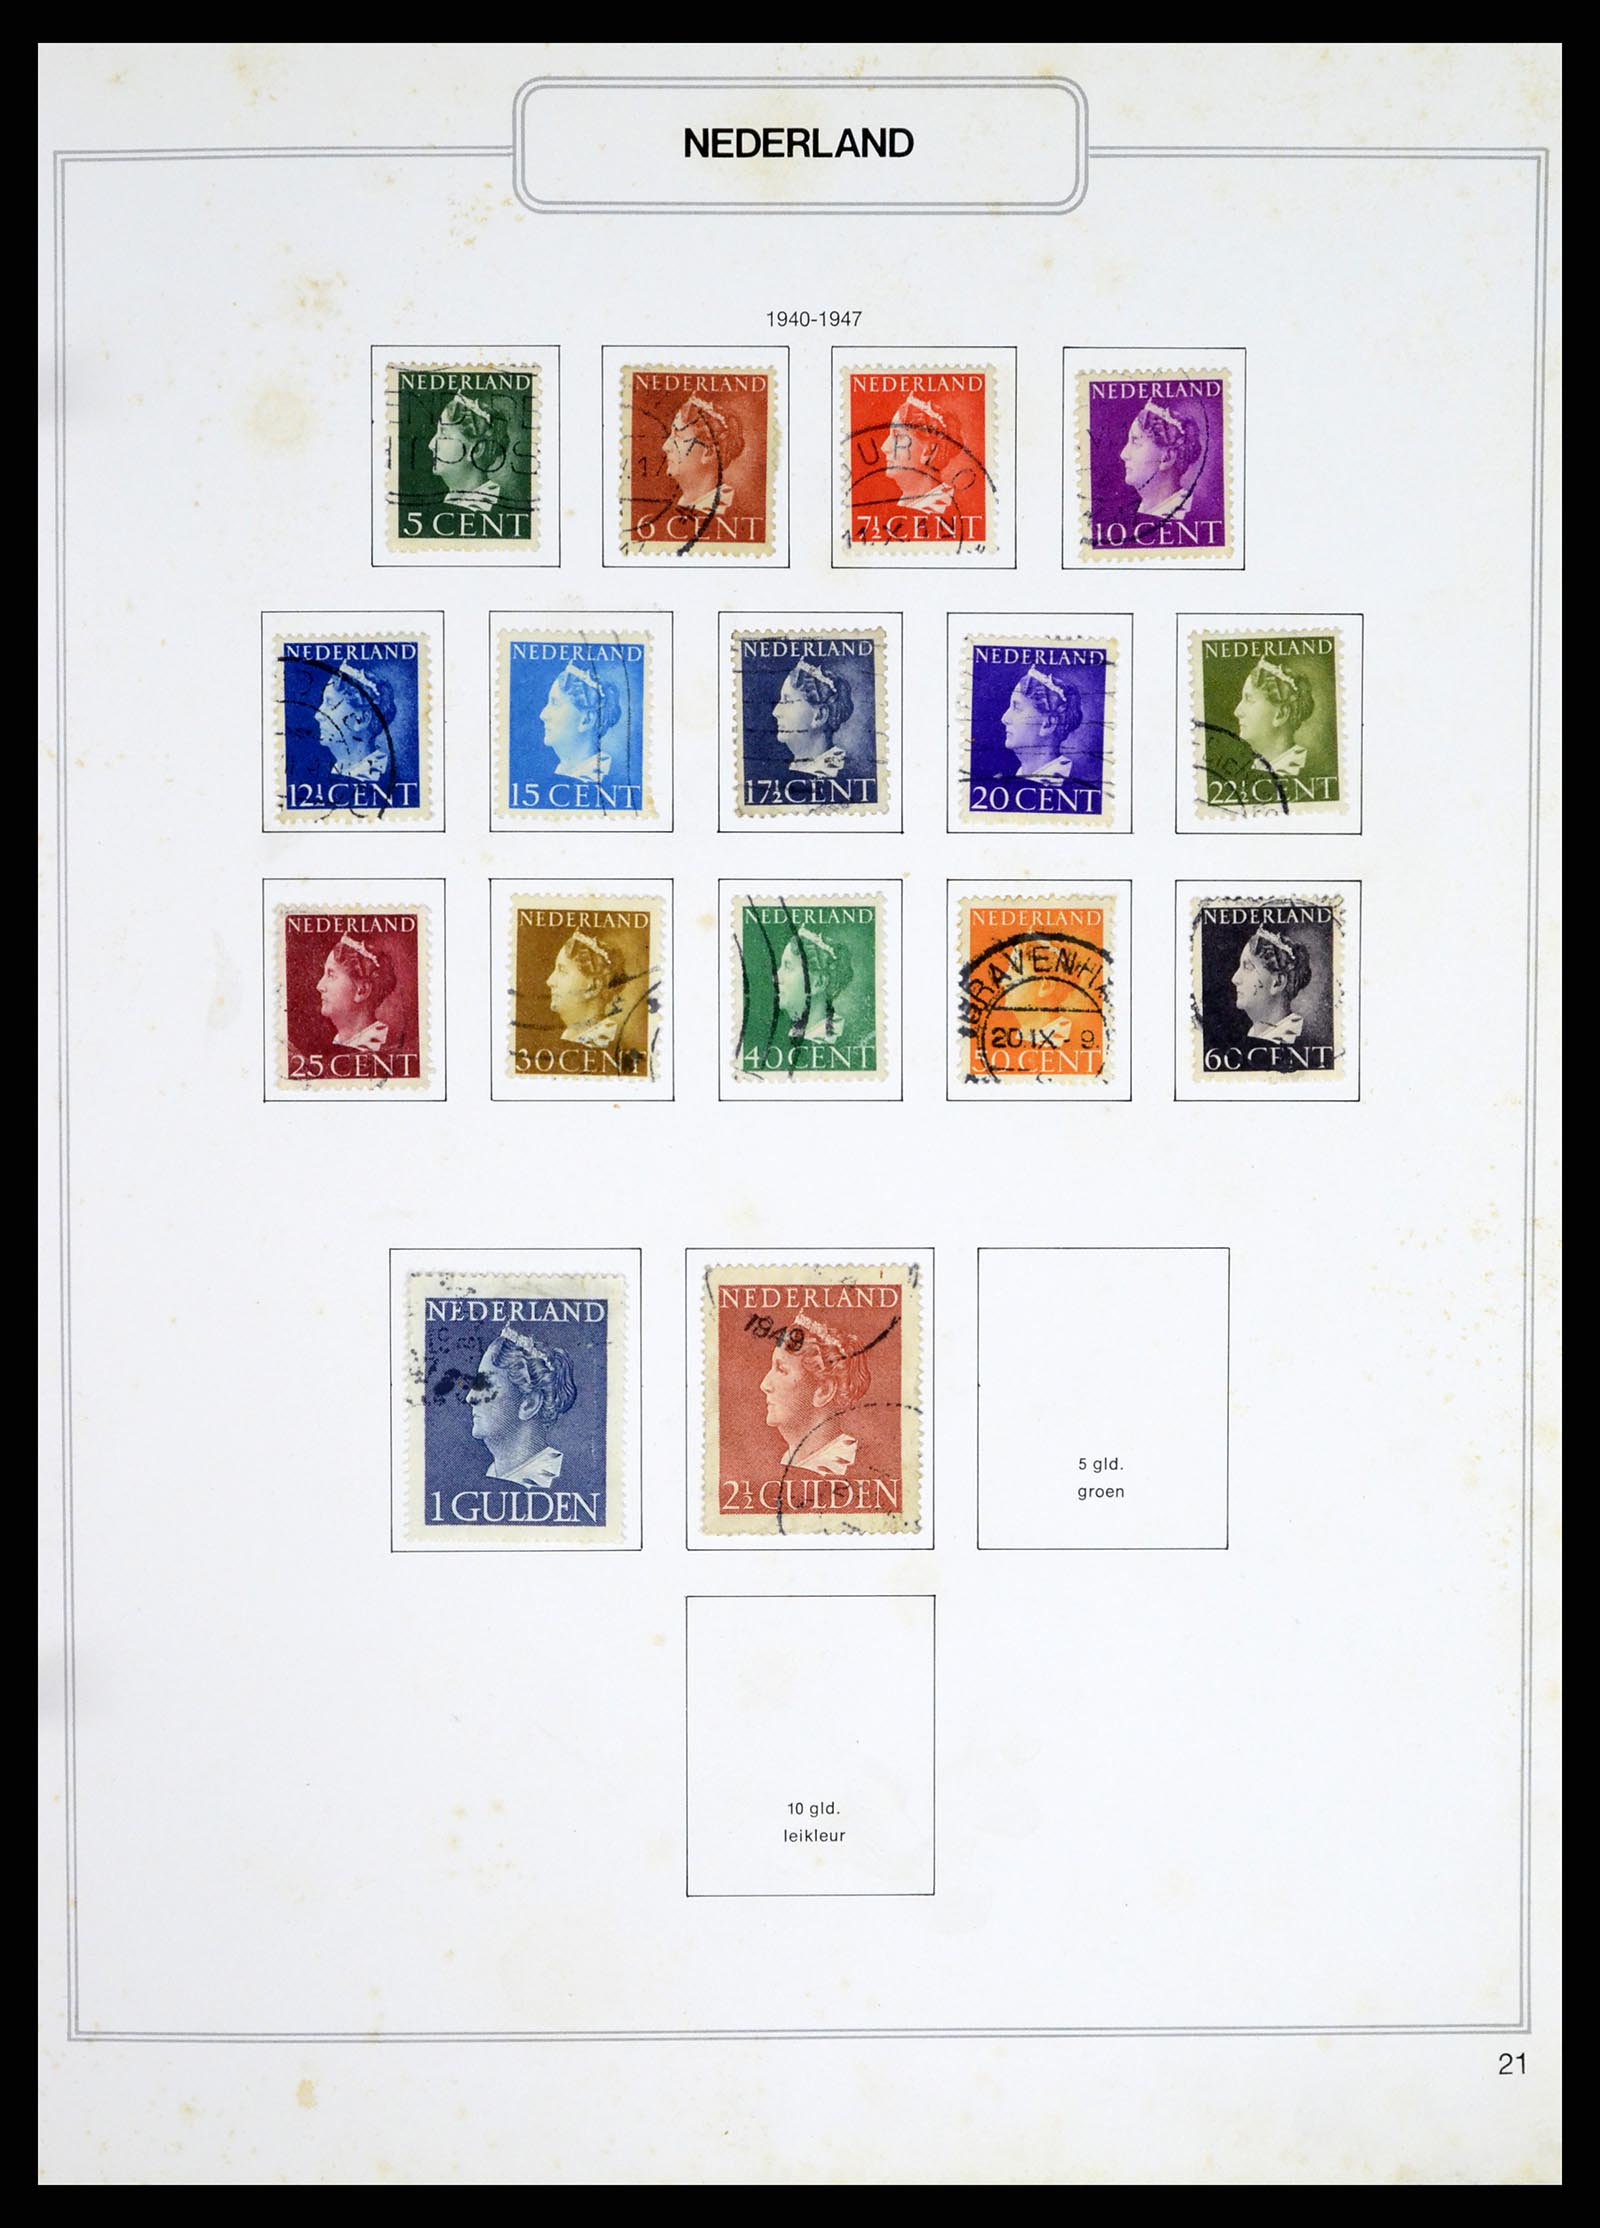 37348 021 - Stamp collection 37348 Netherlands 1852-1995.